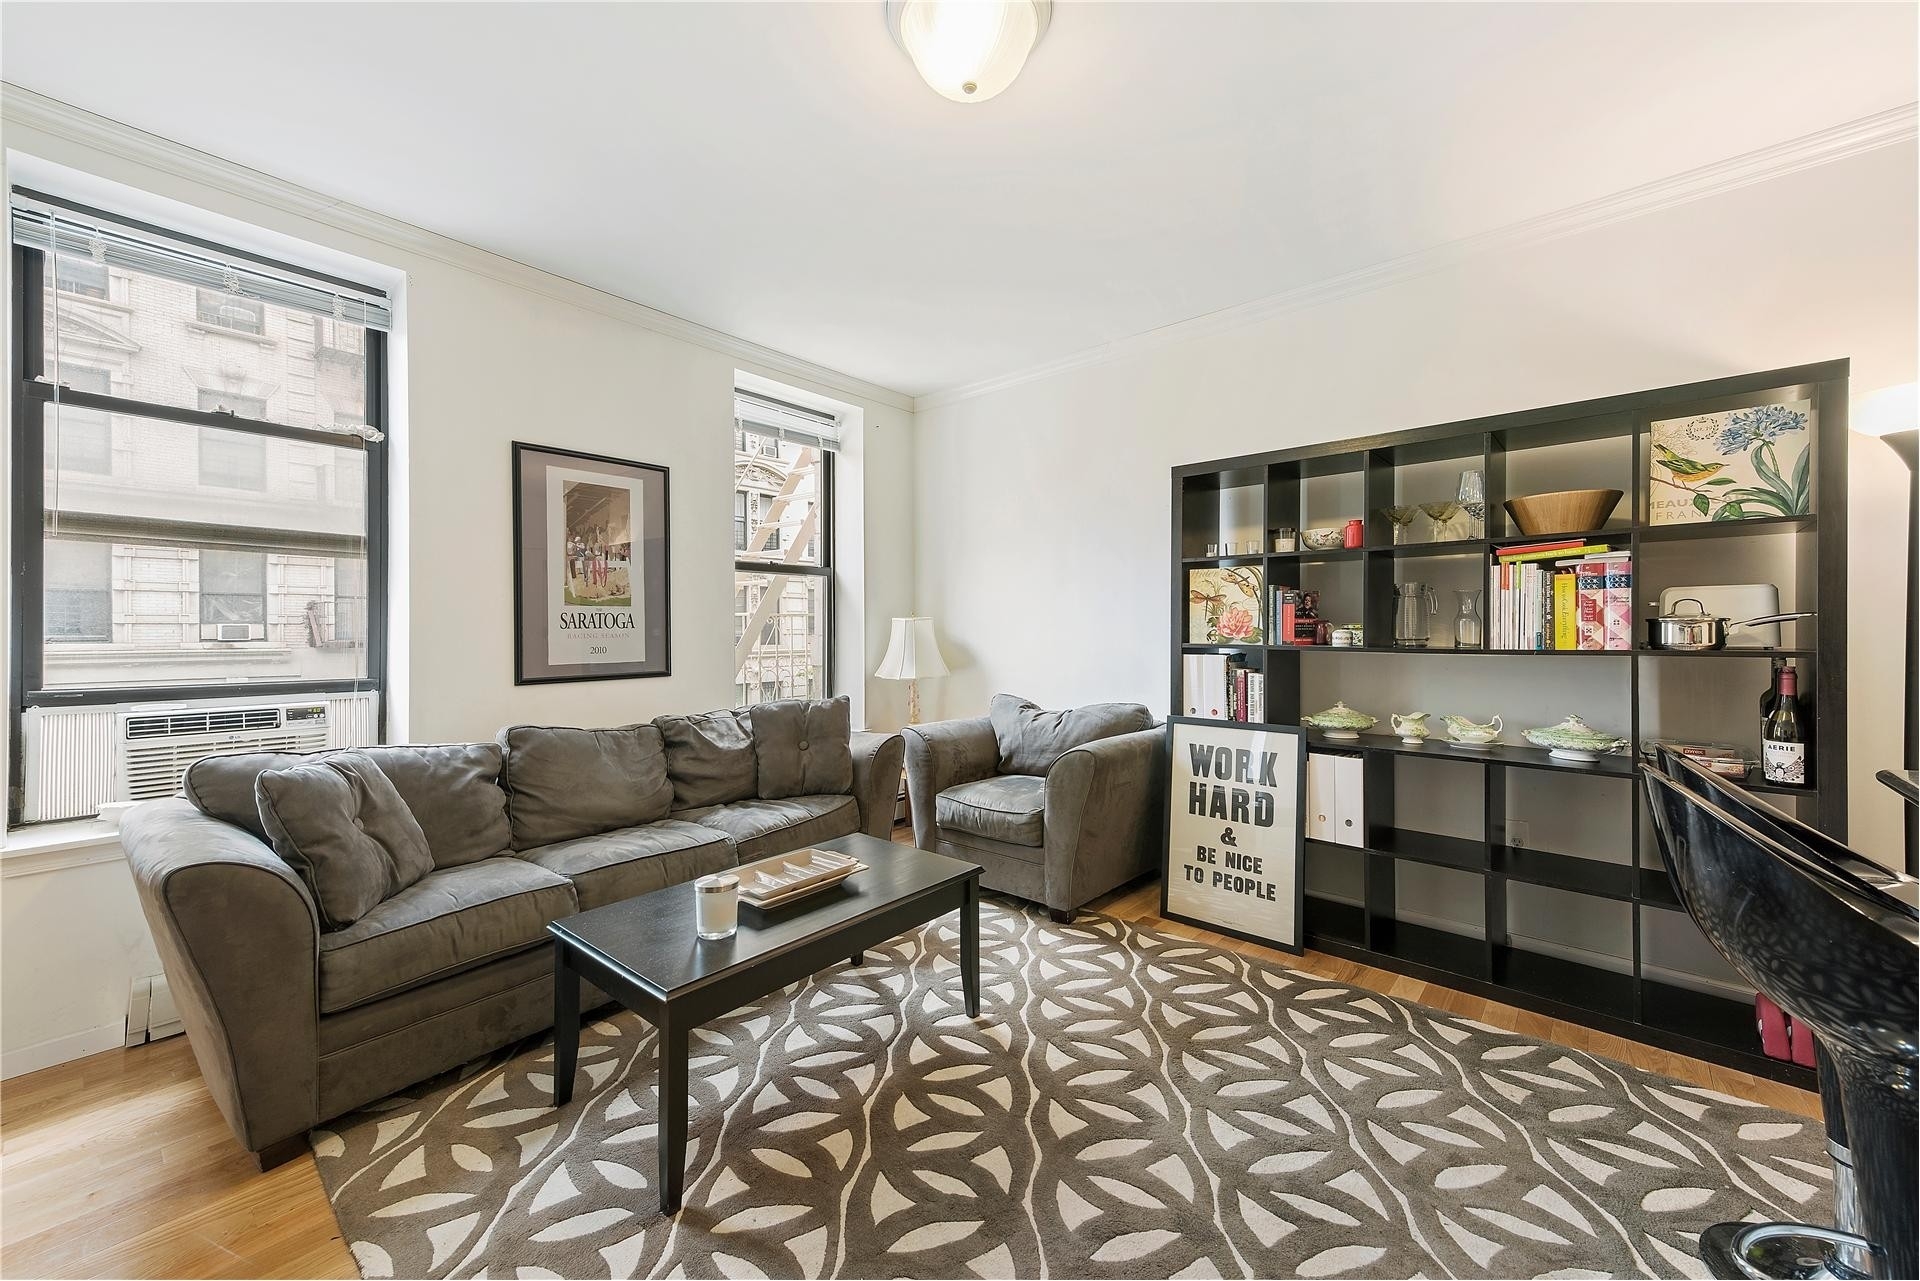 Property at The Park Central, 220 West 111th St, 2D Harlem, New York